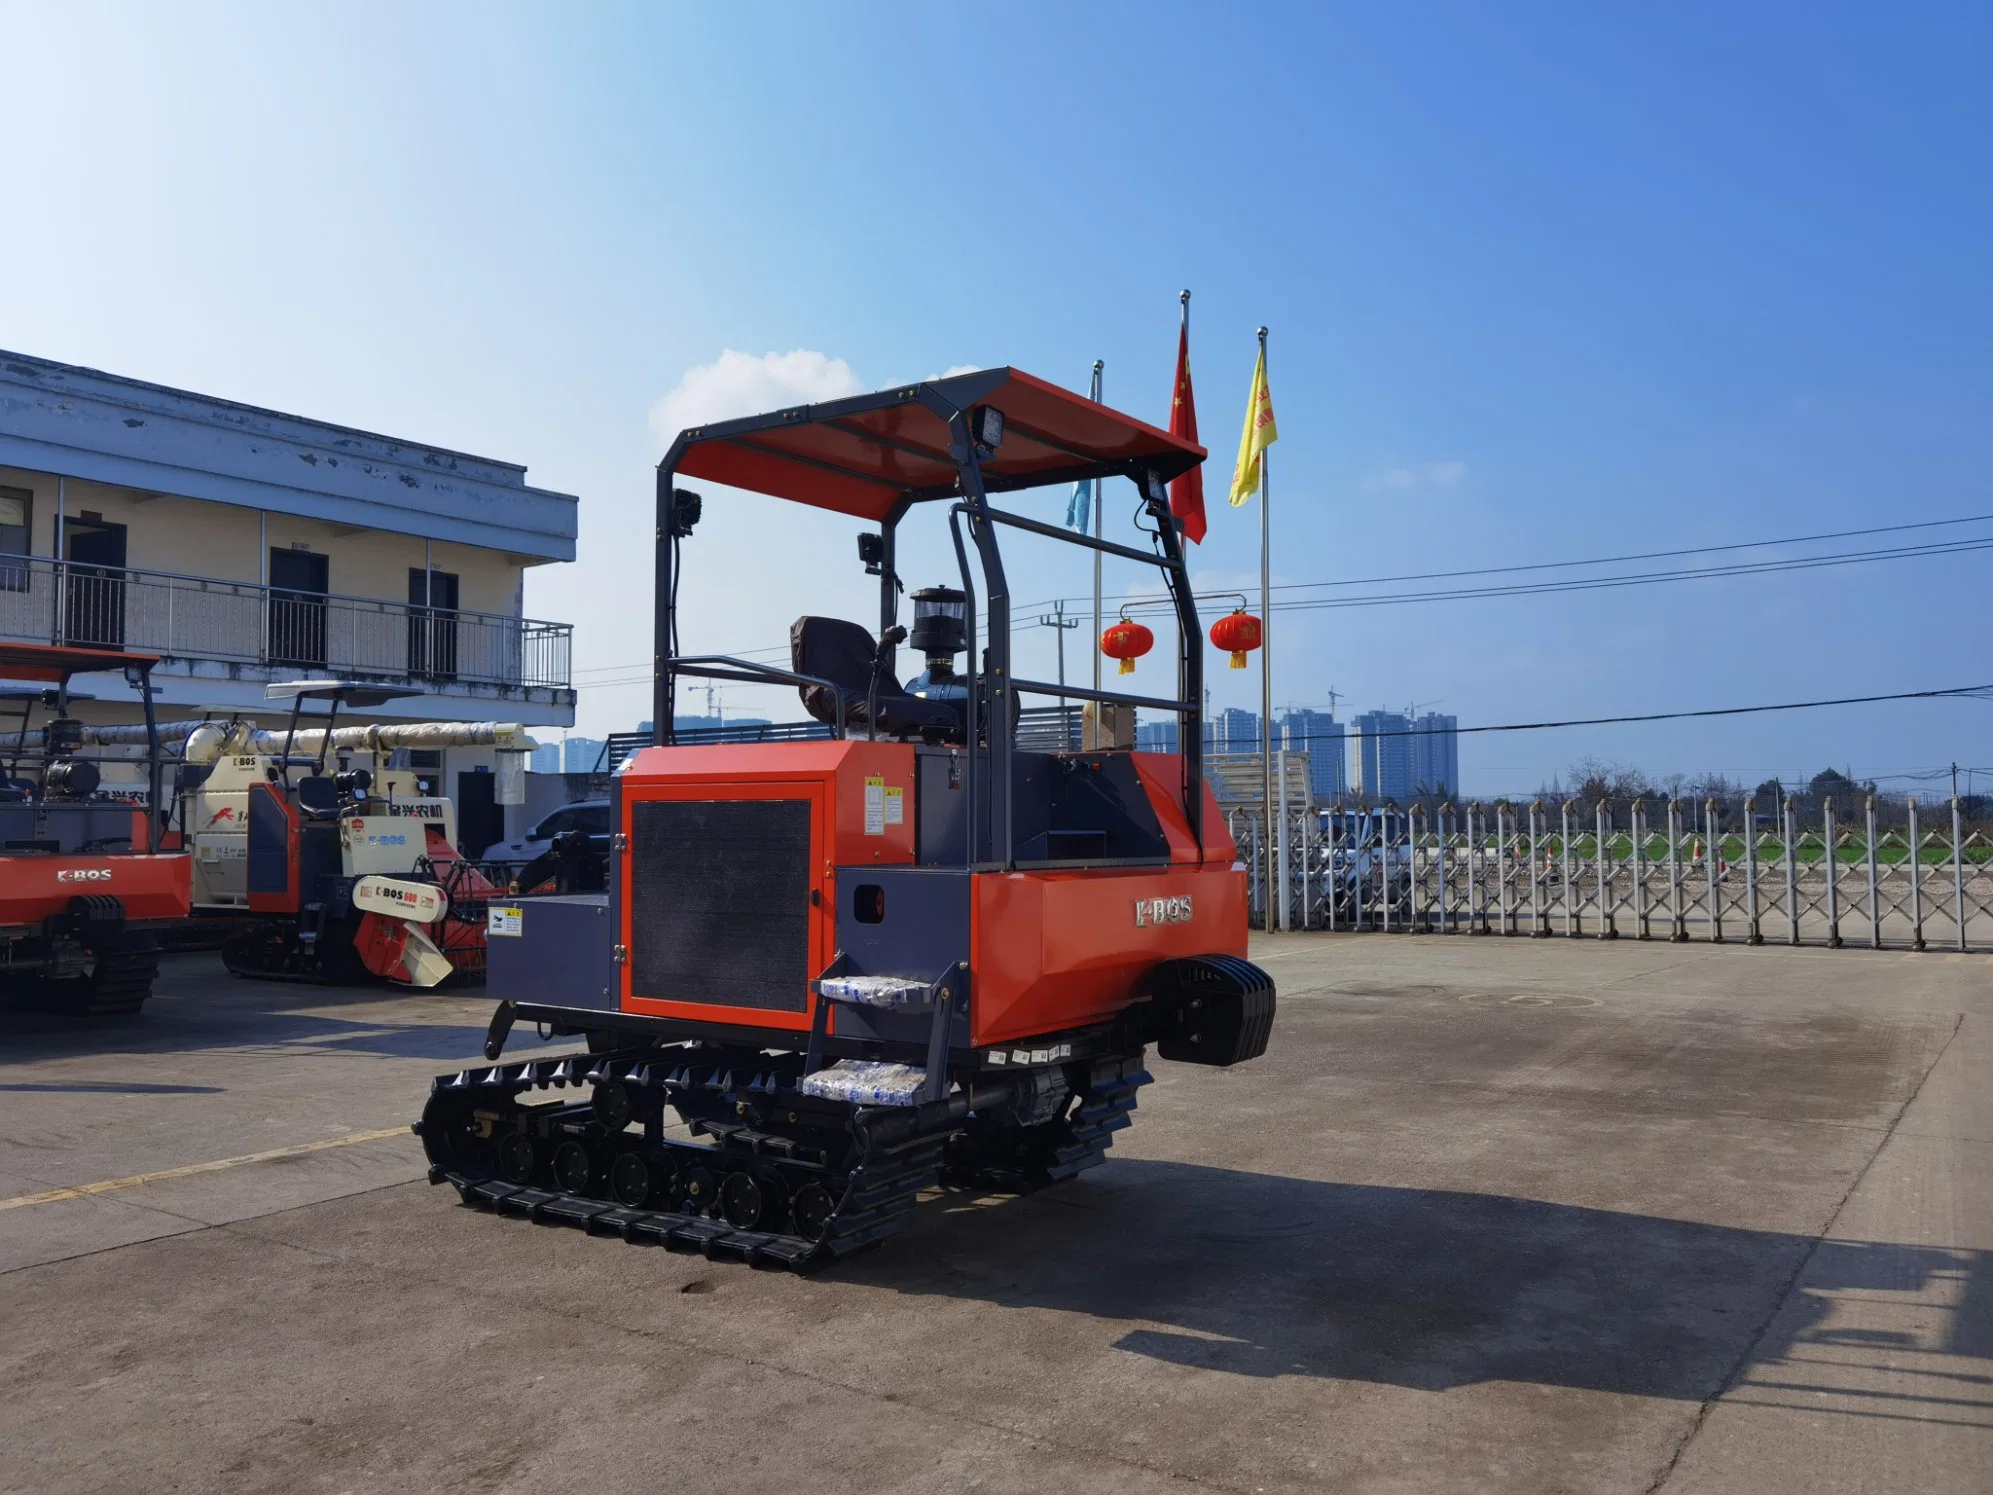 1gzl230 Crawler Tractor with Rotary Cultivator Tiller